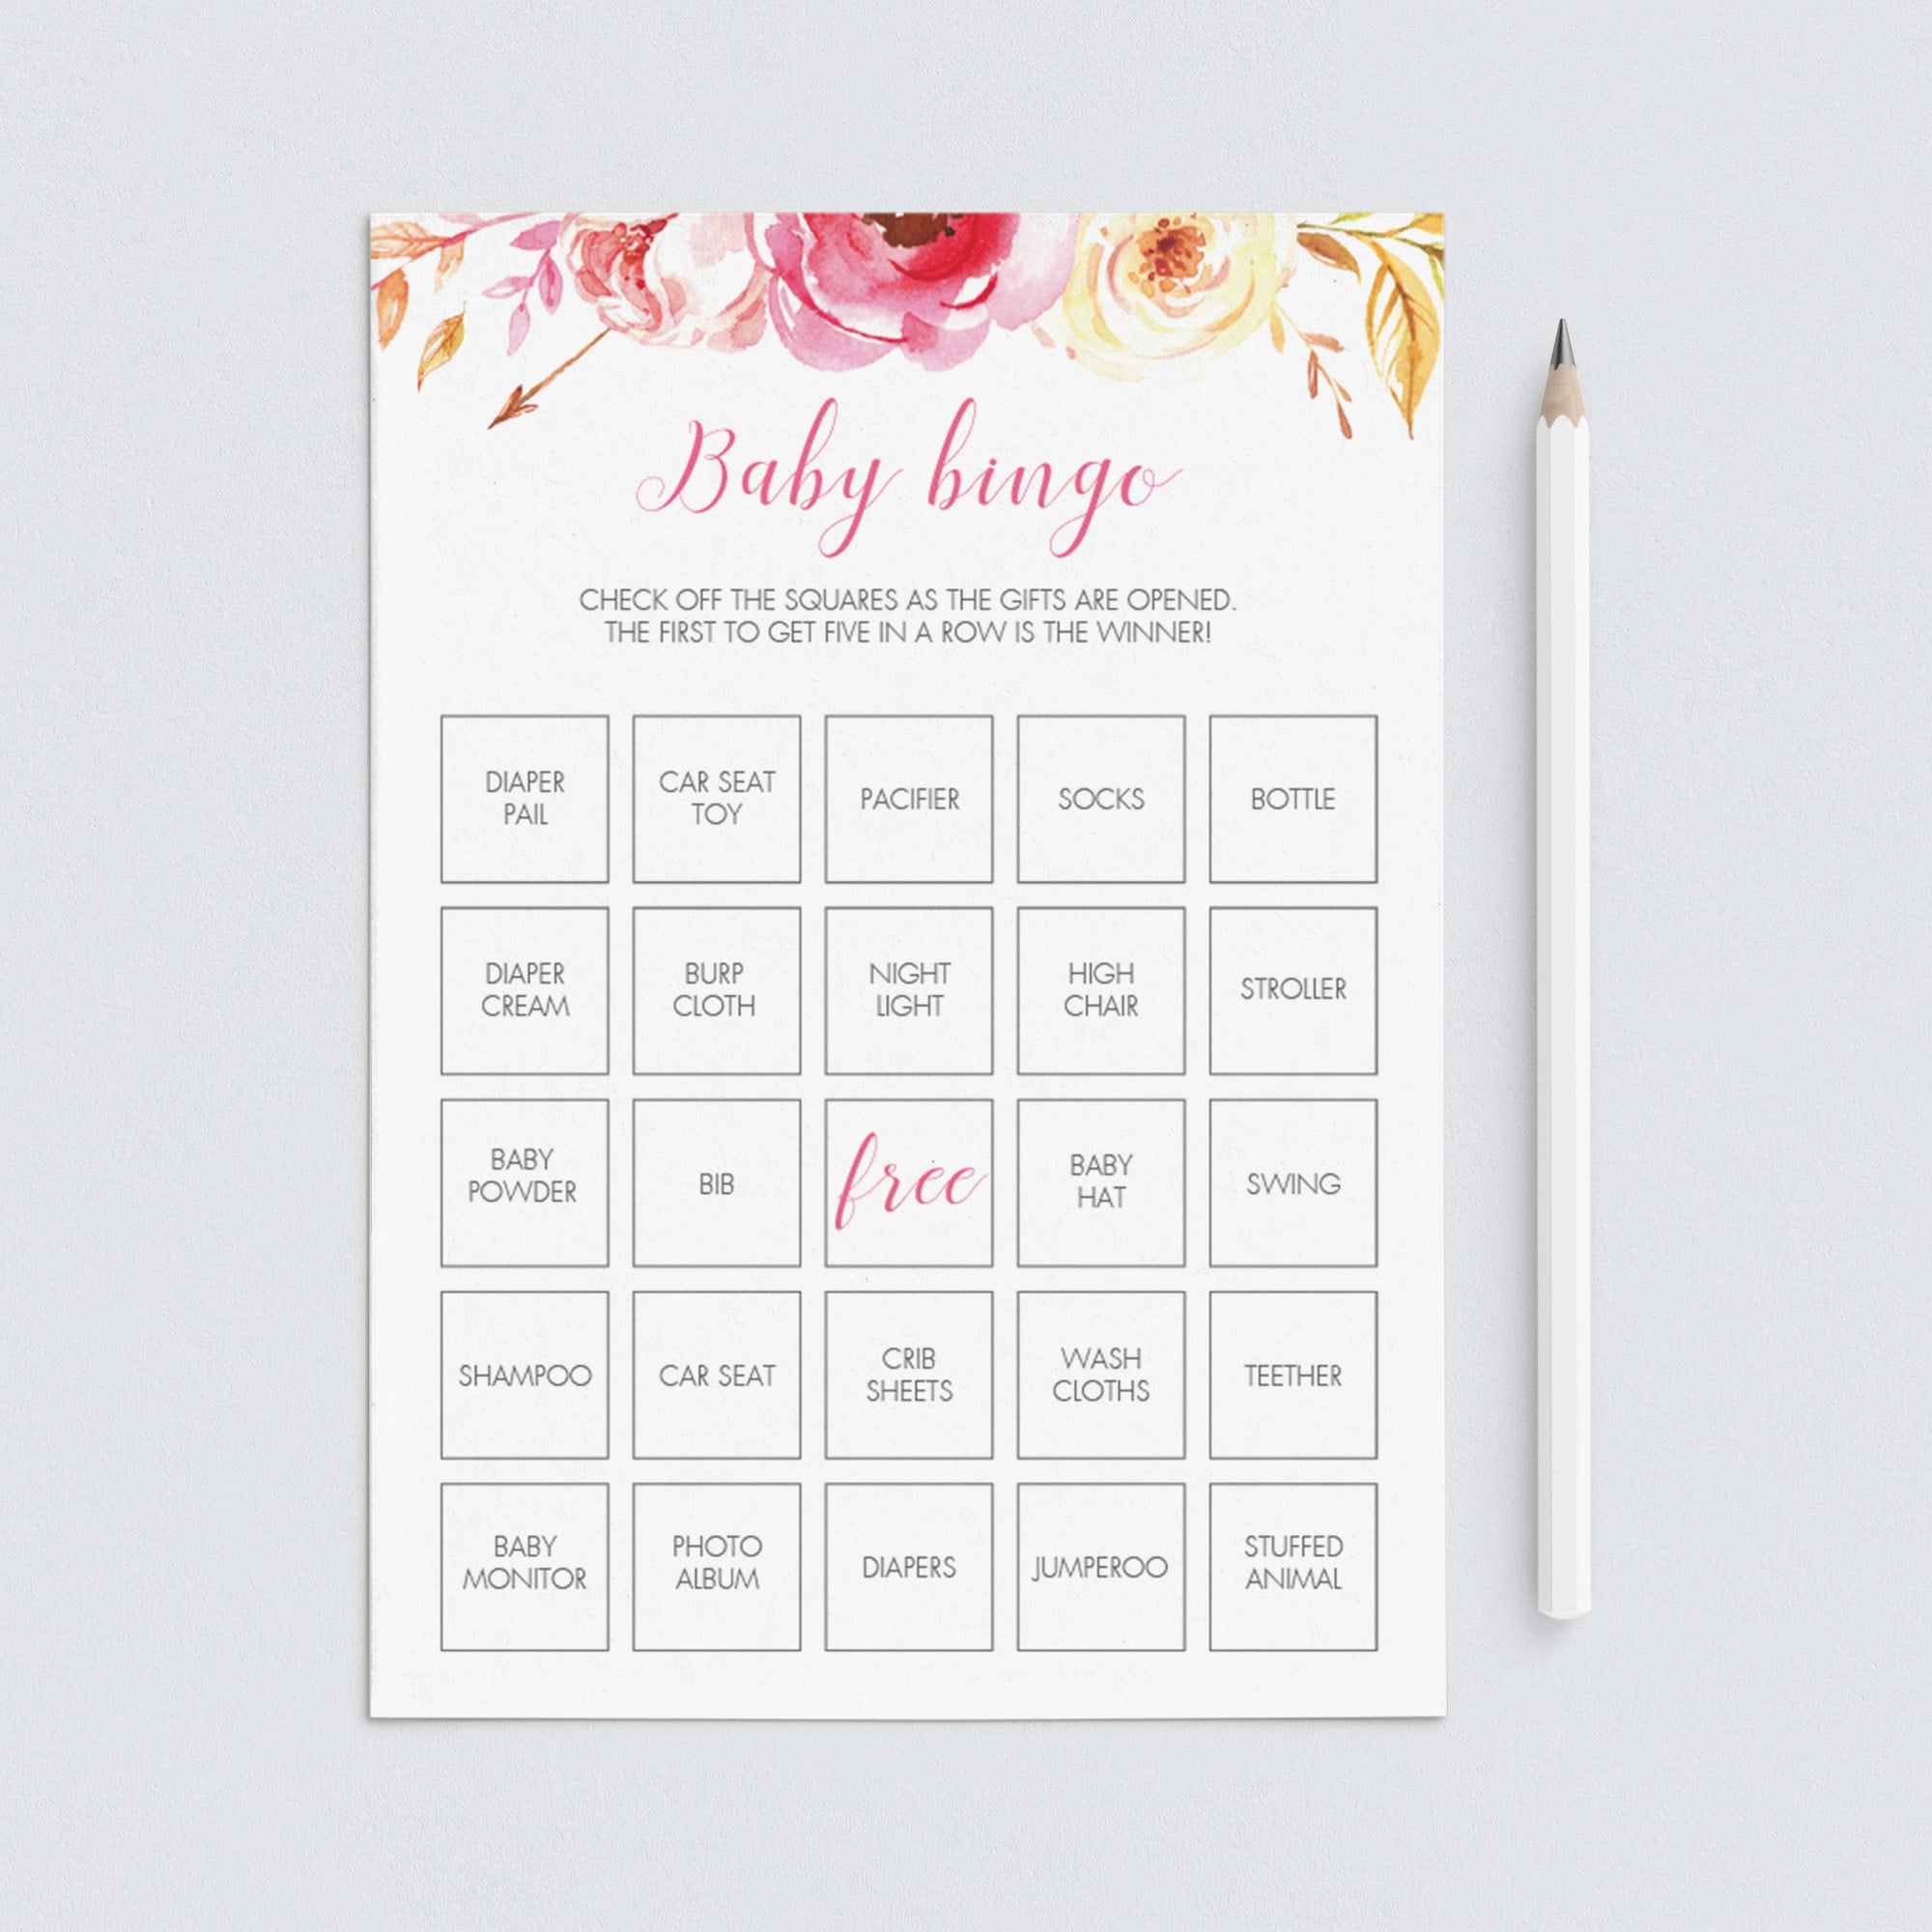 Boho floral baby bingo game cards printable by LittleSizzle